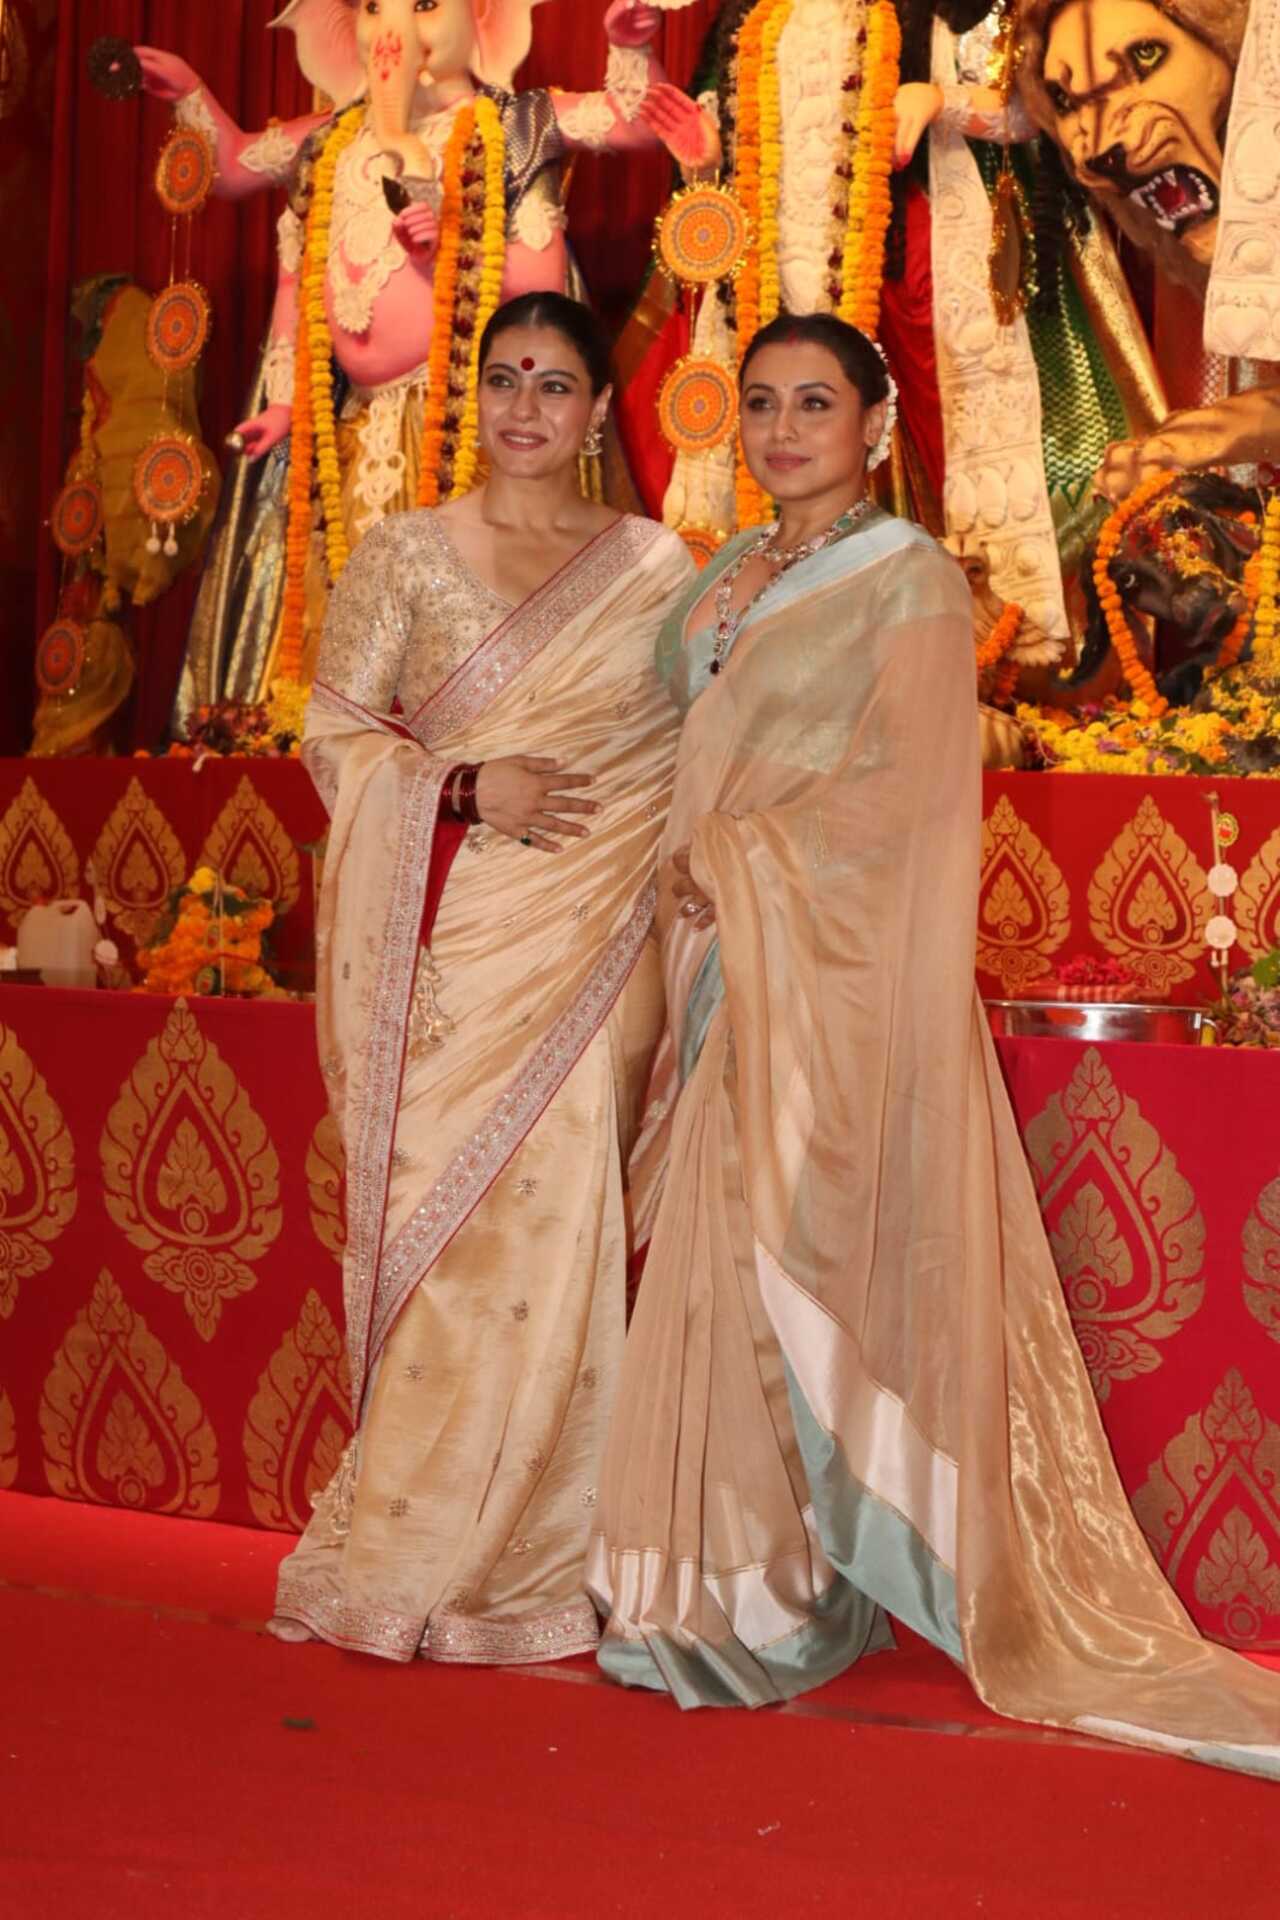 They were seen wearing sarees of identical colour